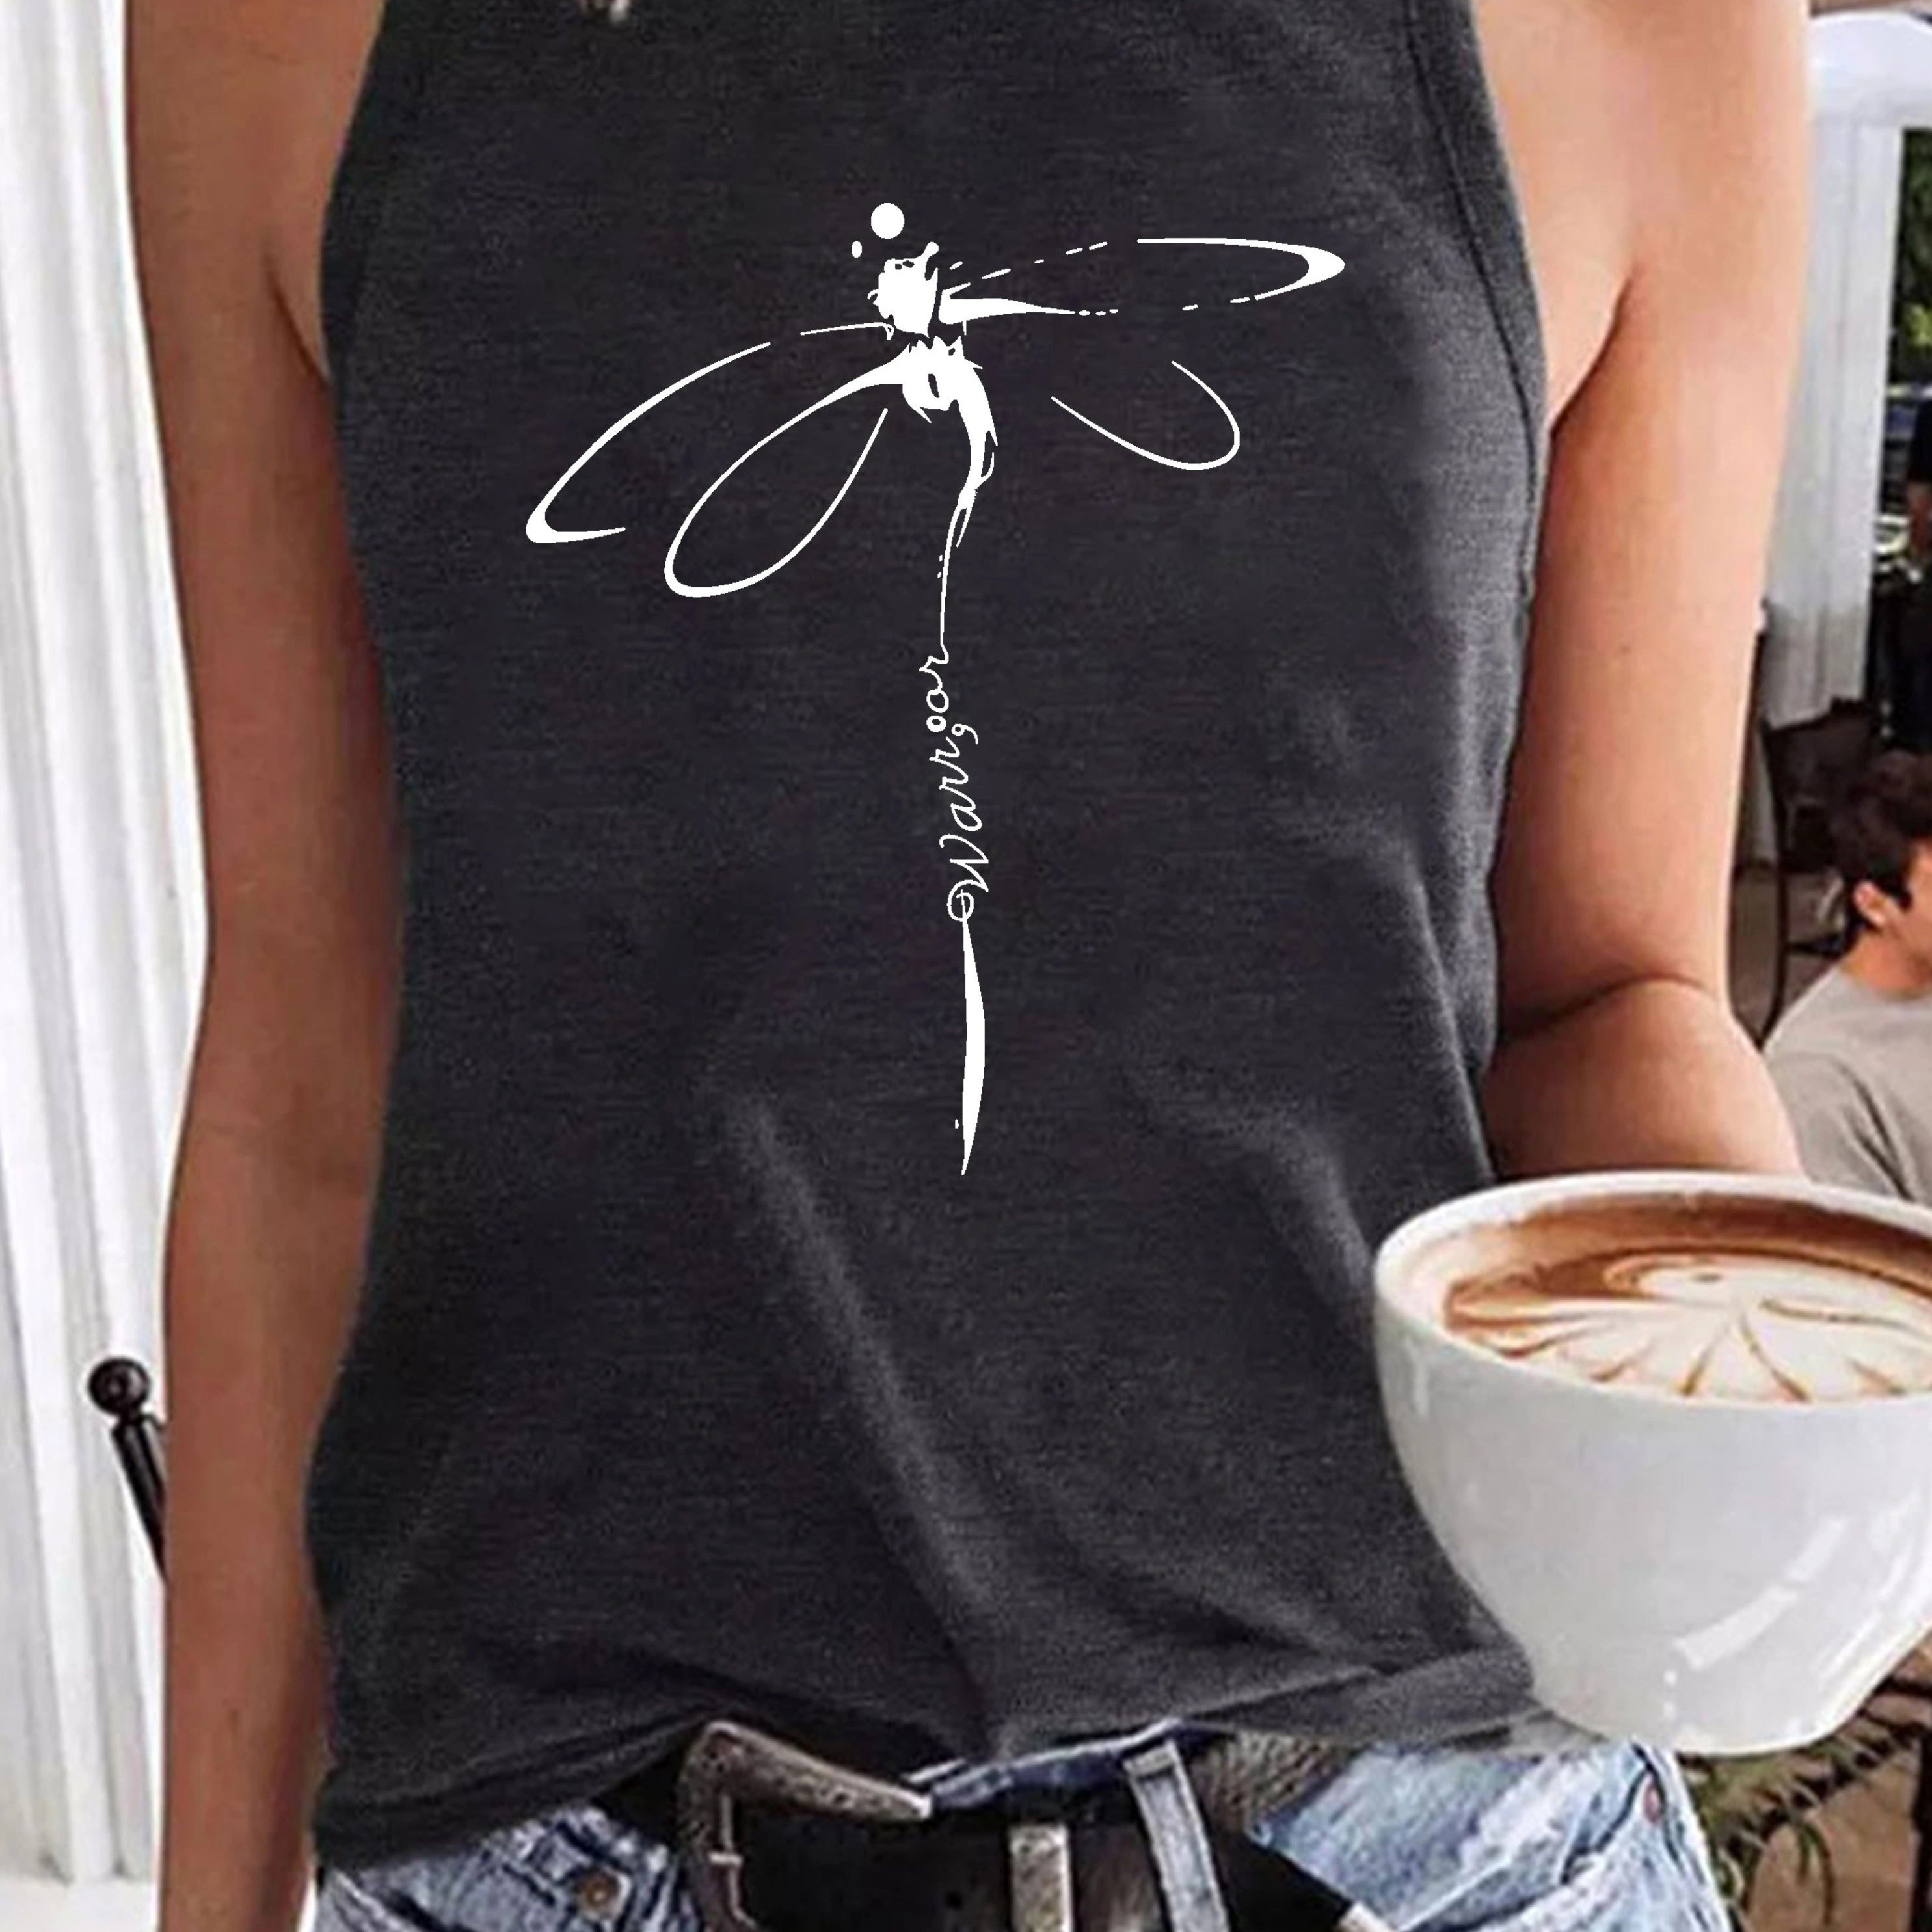 Dragonfly Print Tank Top, Casual Crew Neck Summer Sleeveless Top, Women's Clothing